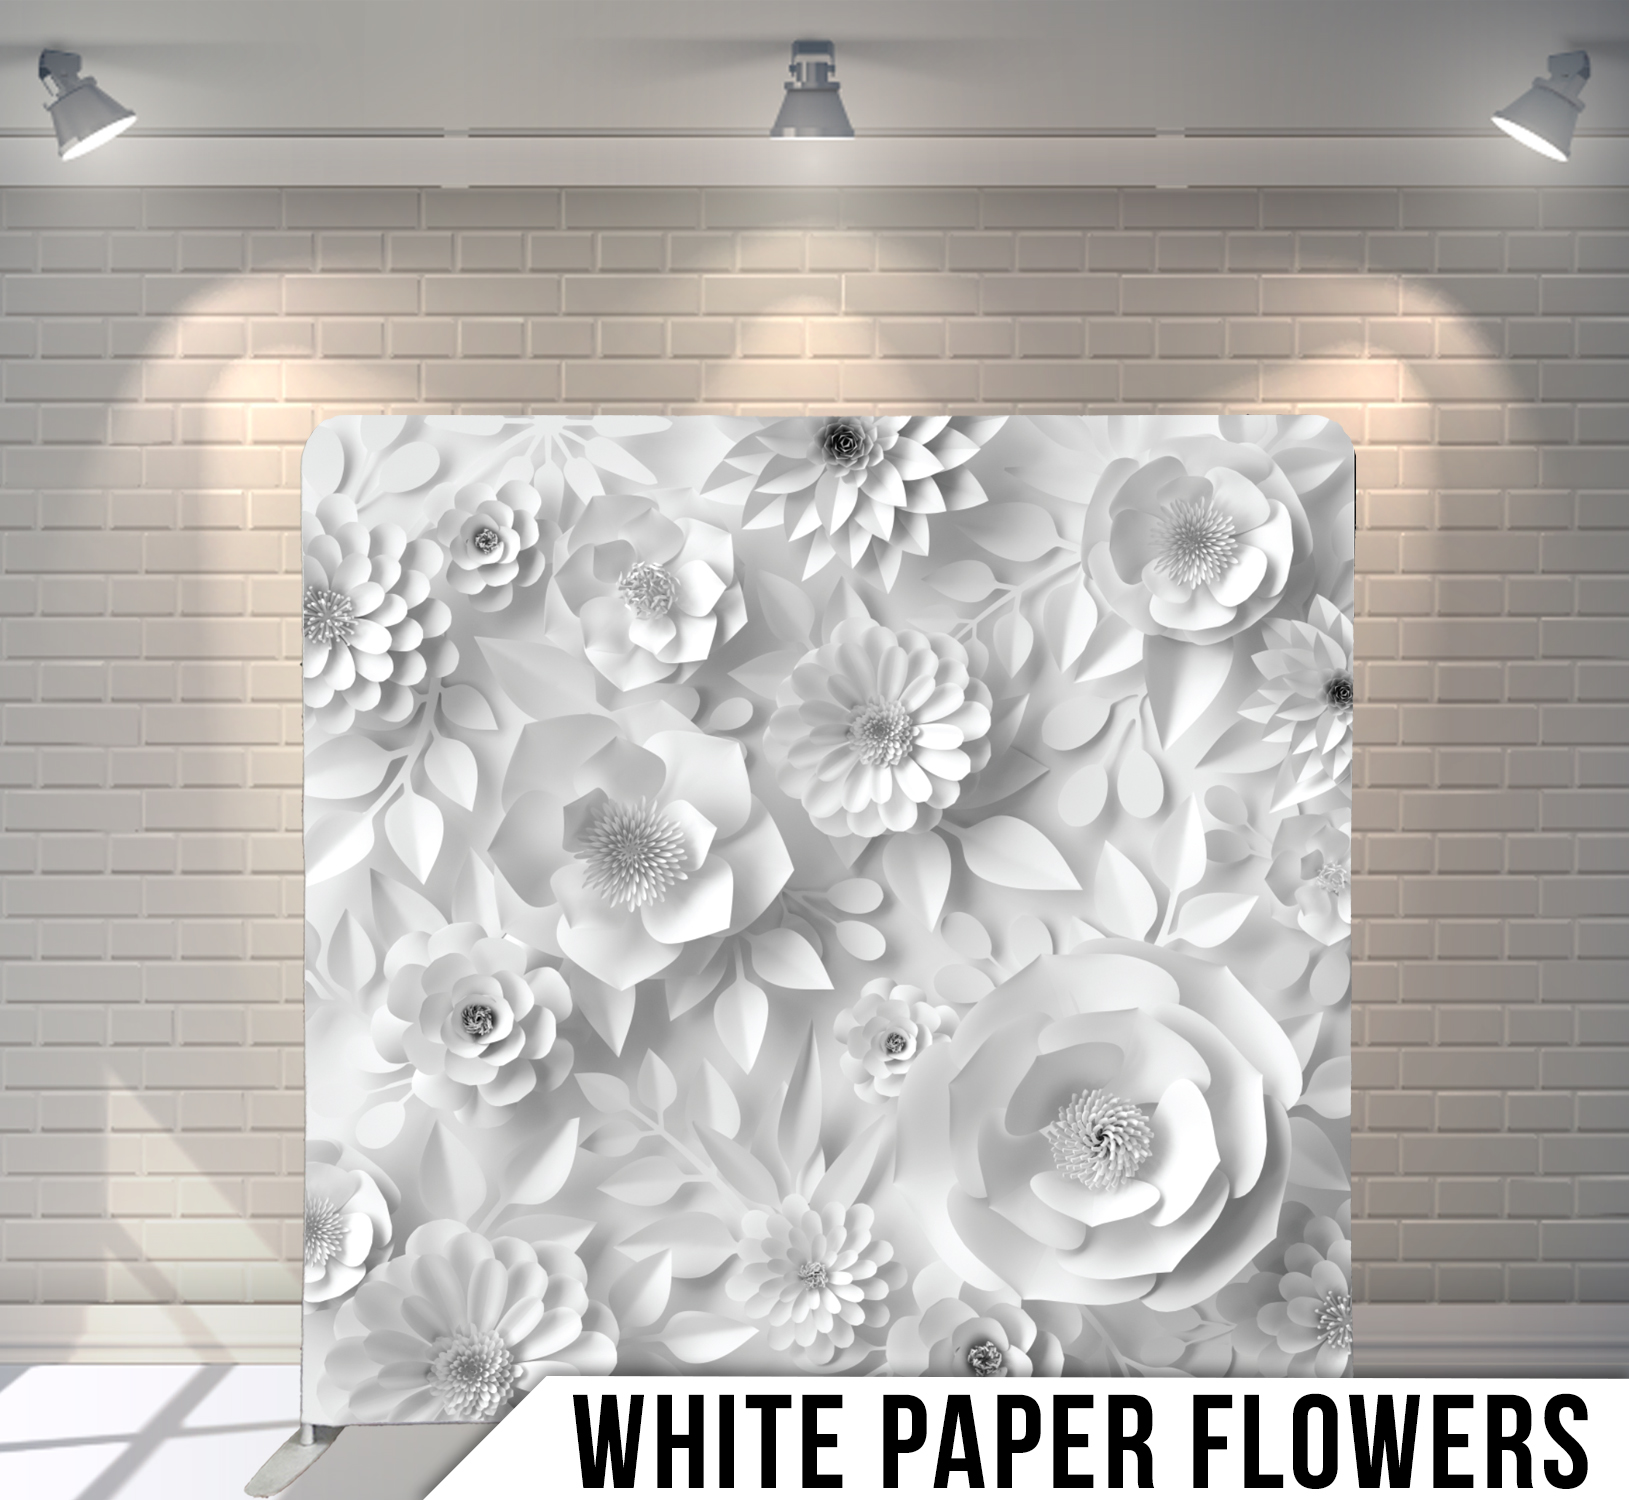 White Paper Flowers Photo Booth Back Drop Rental in Bloomington Indiana